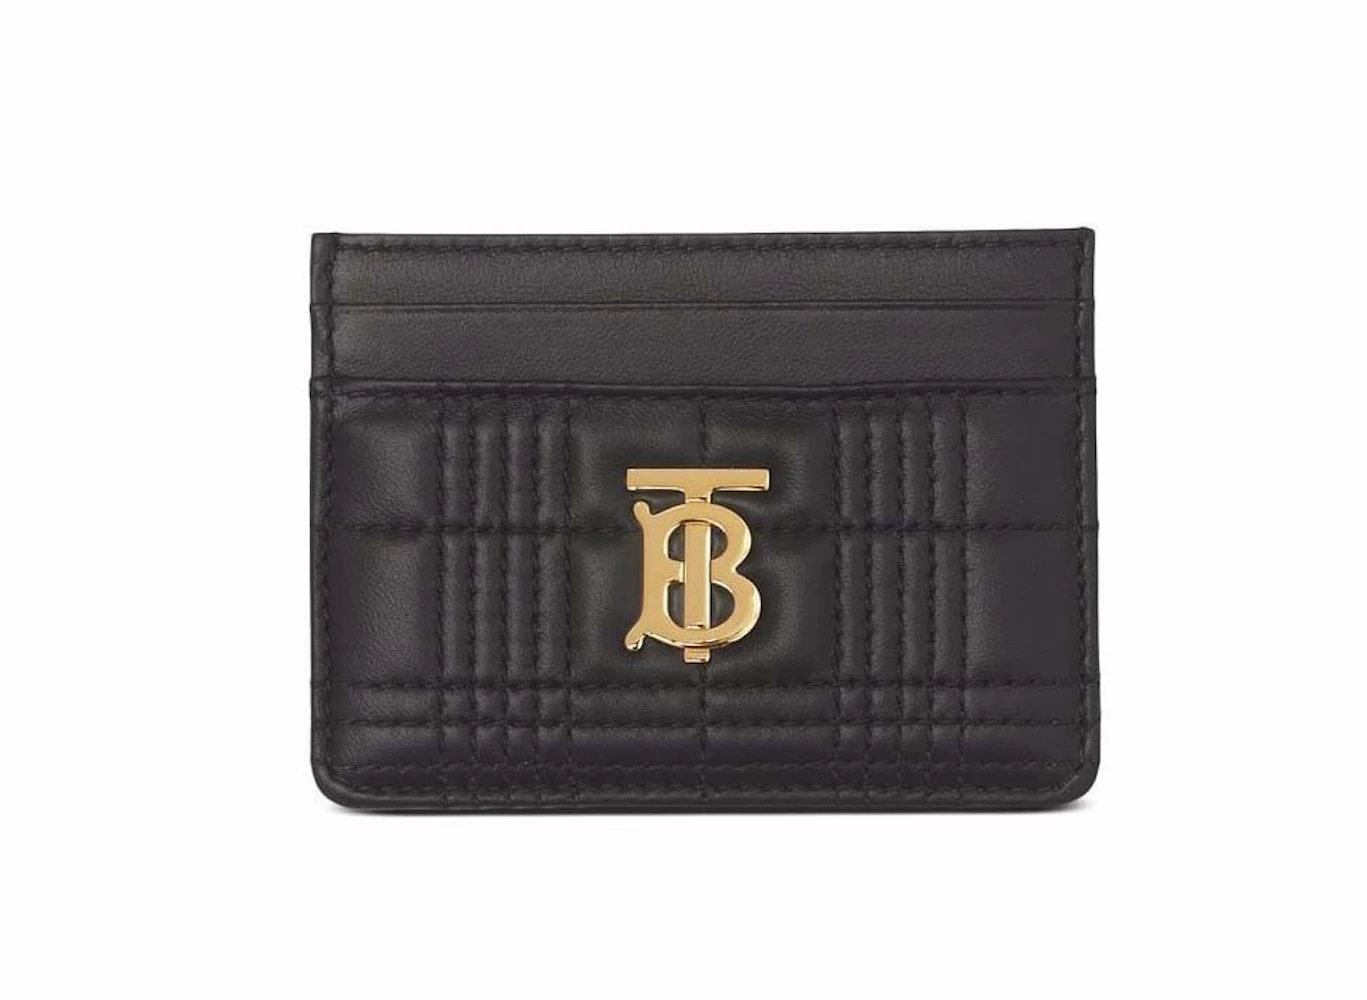 Burberry Lola Quilted Leather Zip Around Wallet